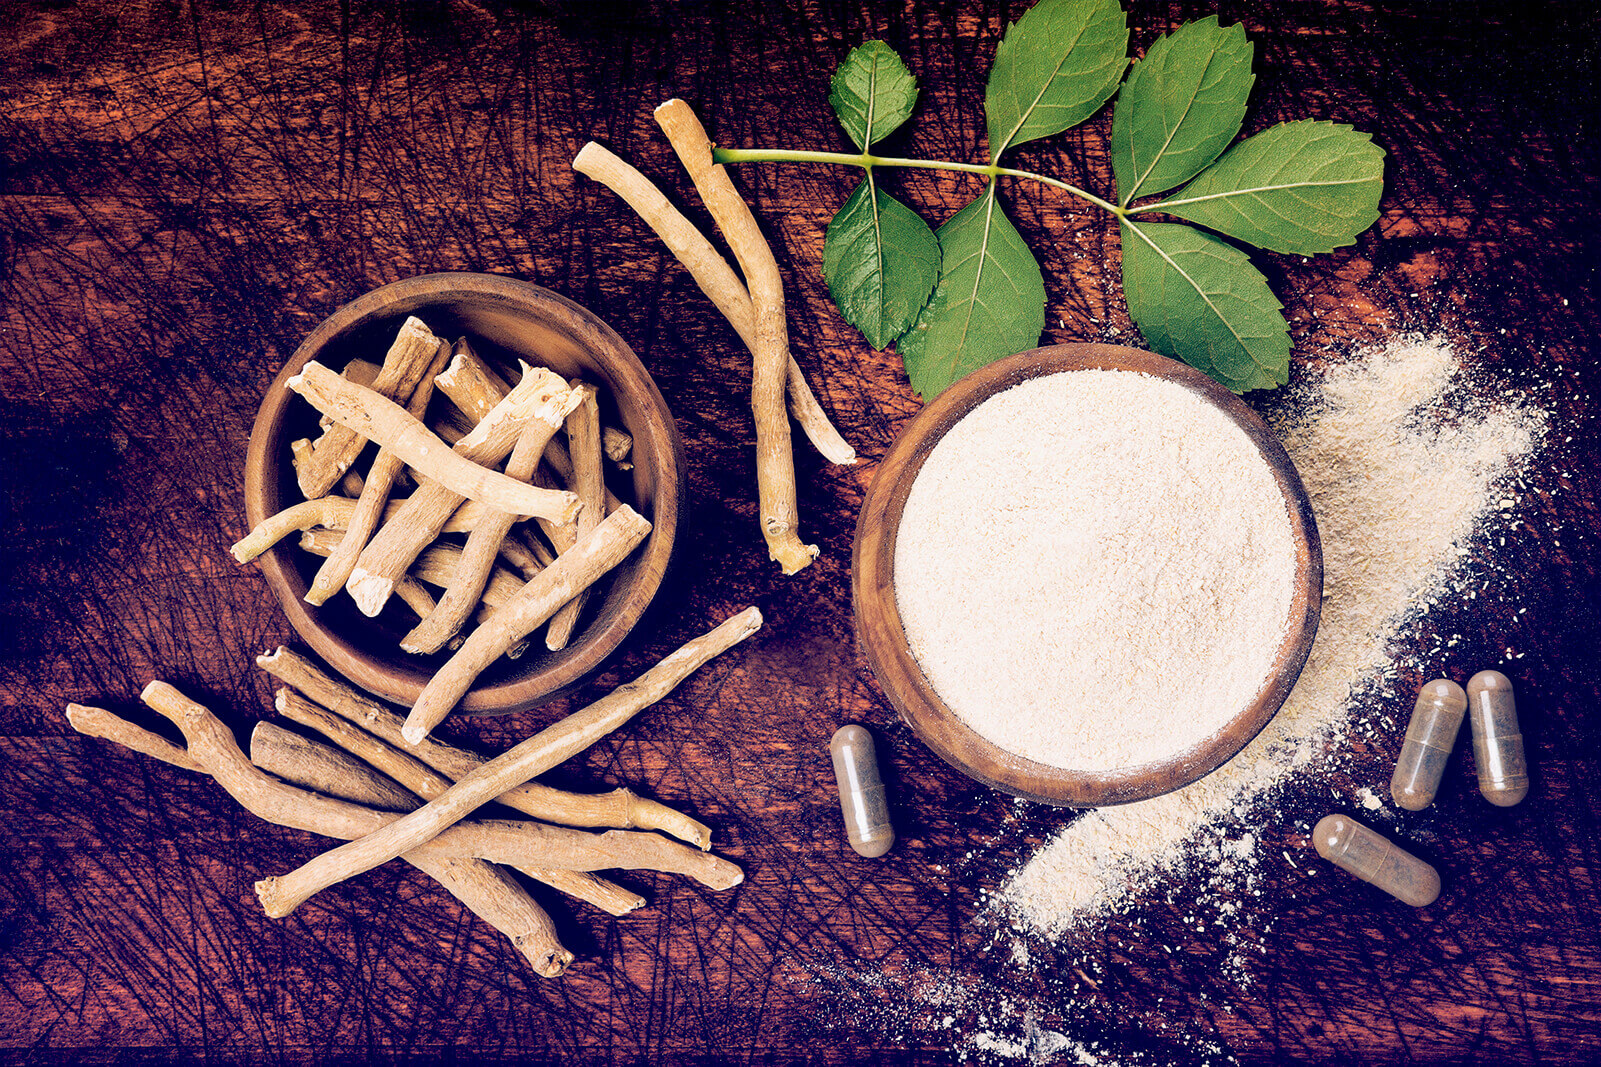 REPS: Ashwagandha supplementation for stress and anxiety